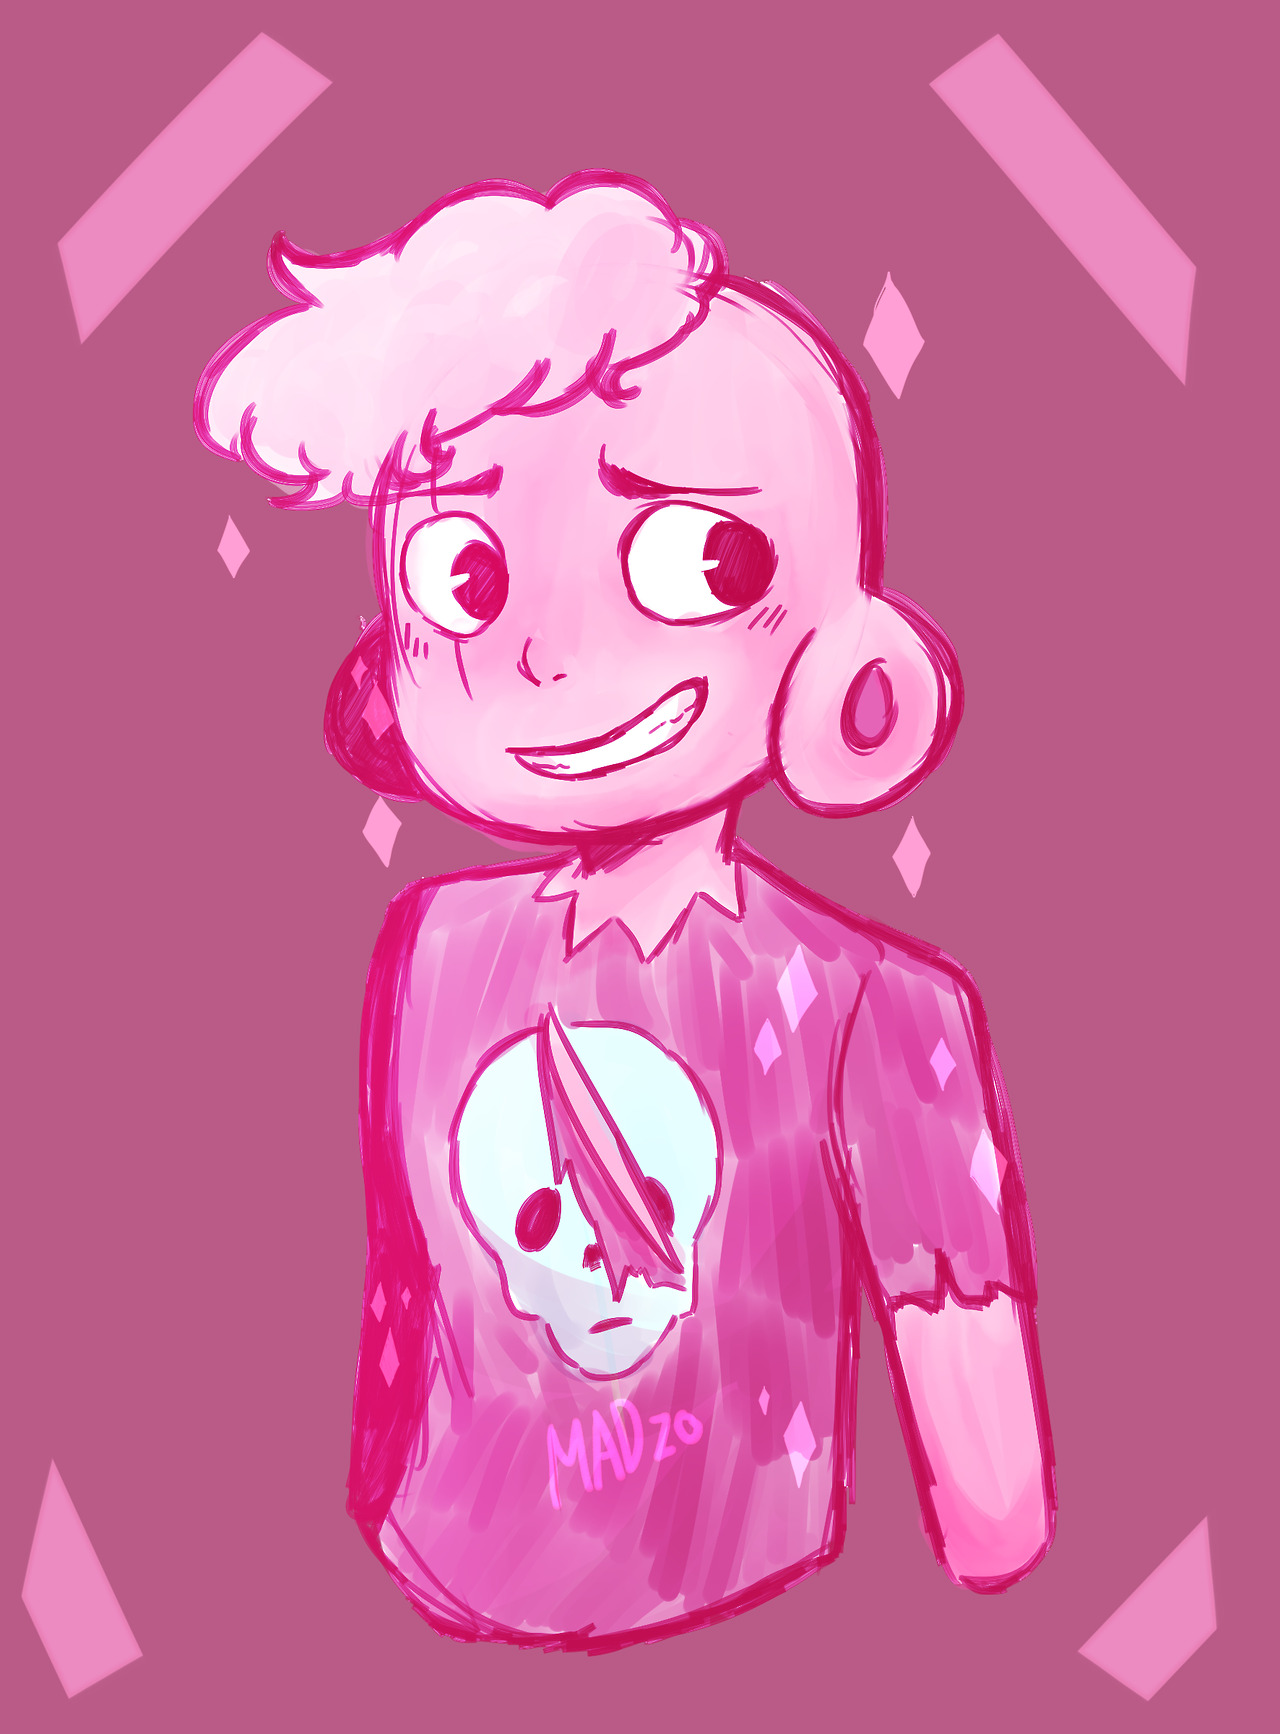 HELLO YES I WOULD DIE FOR LARS